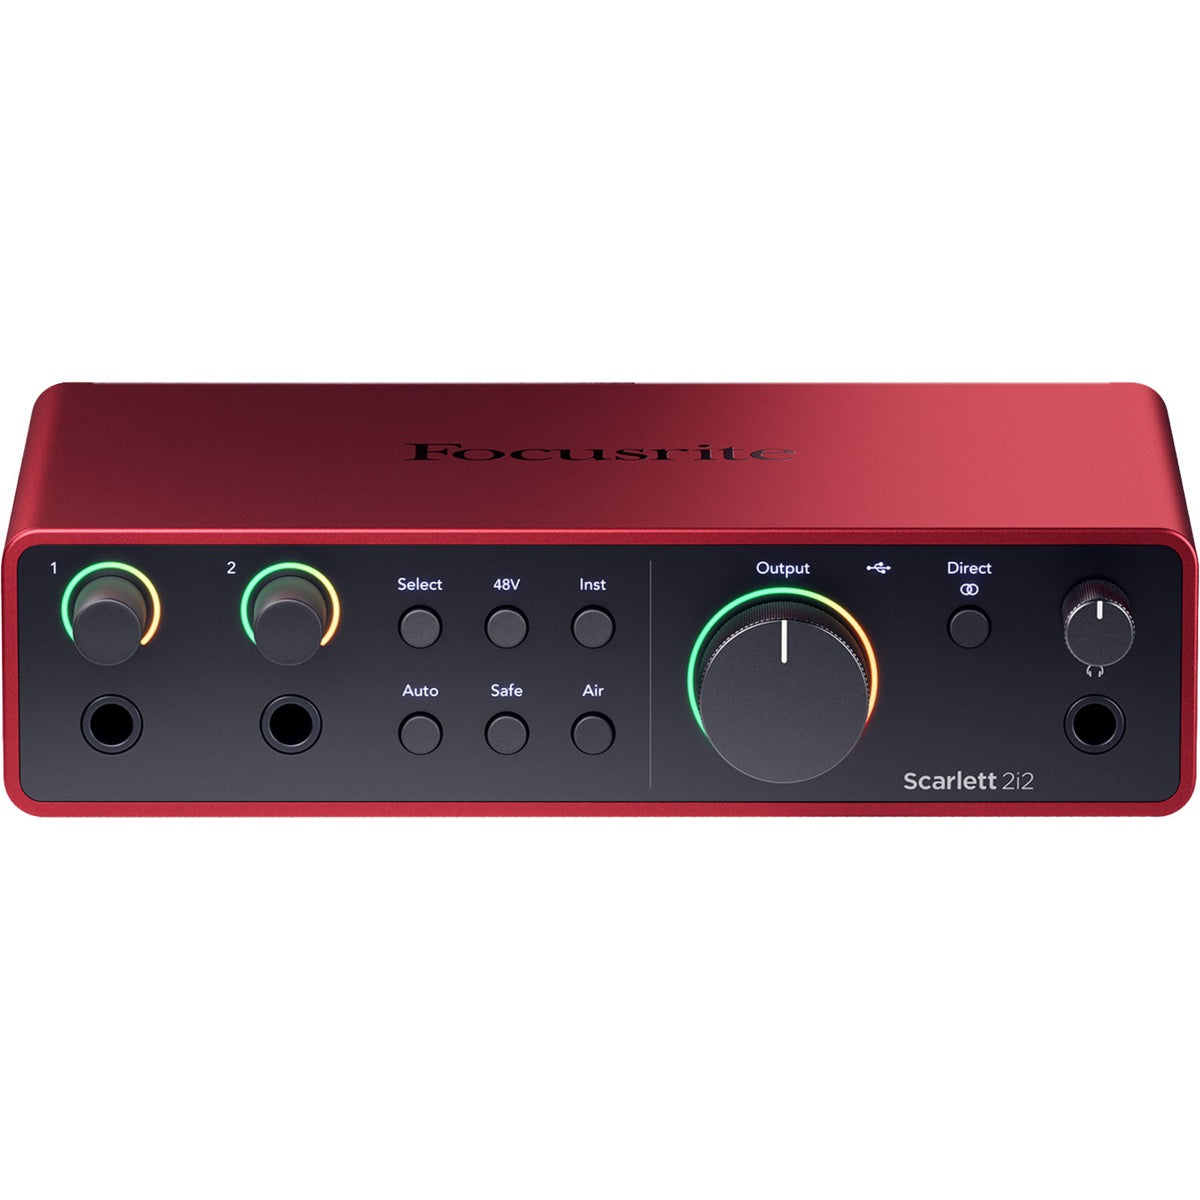 Discover the New Focusrite Scarlett 4th Gen Interfaces and Bundles